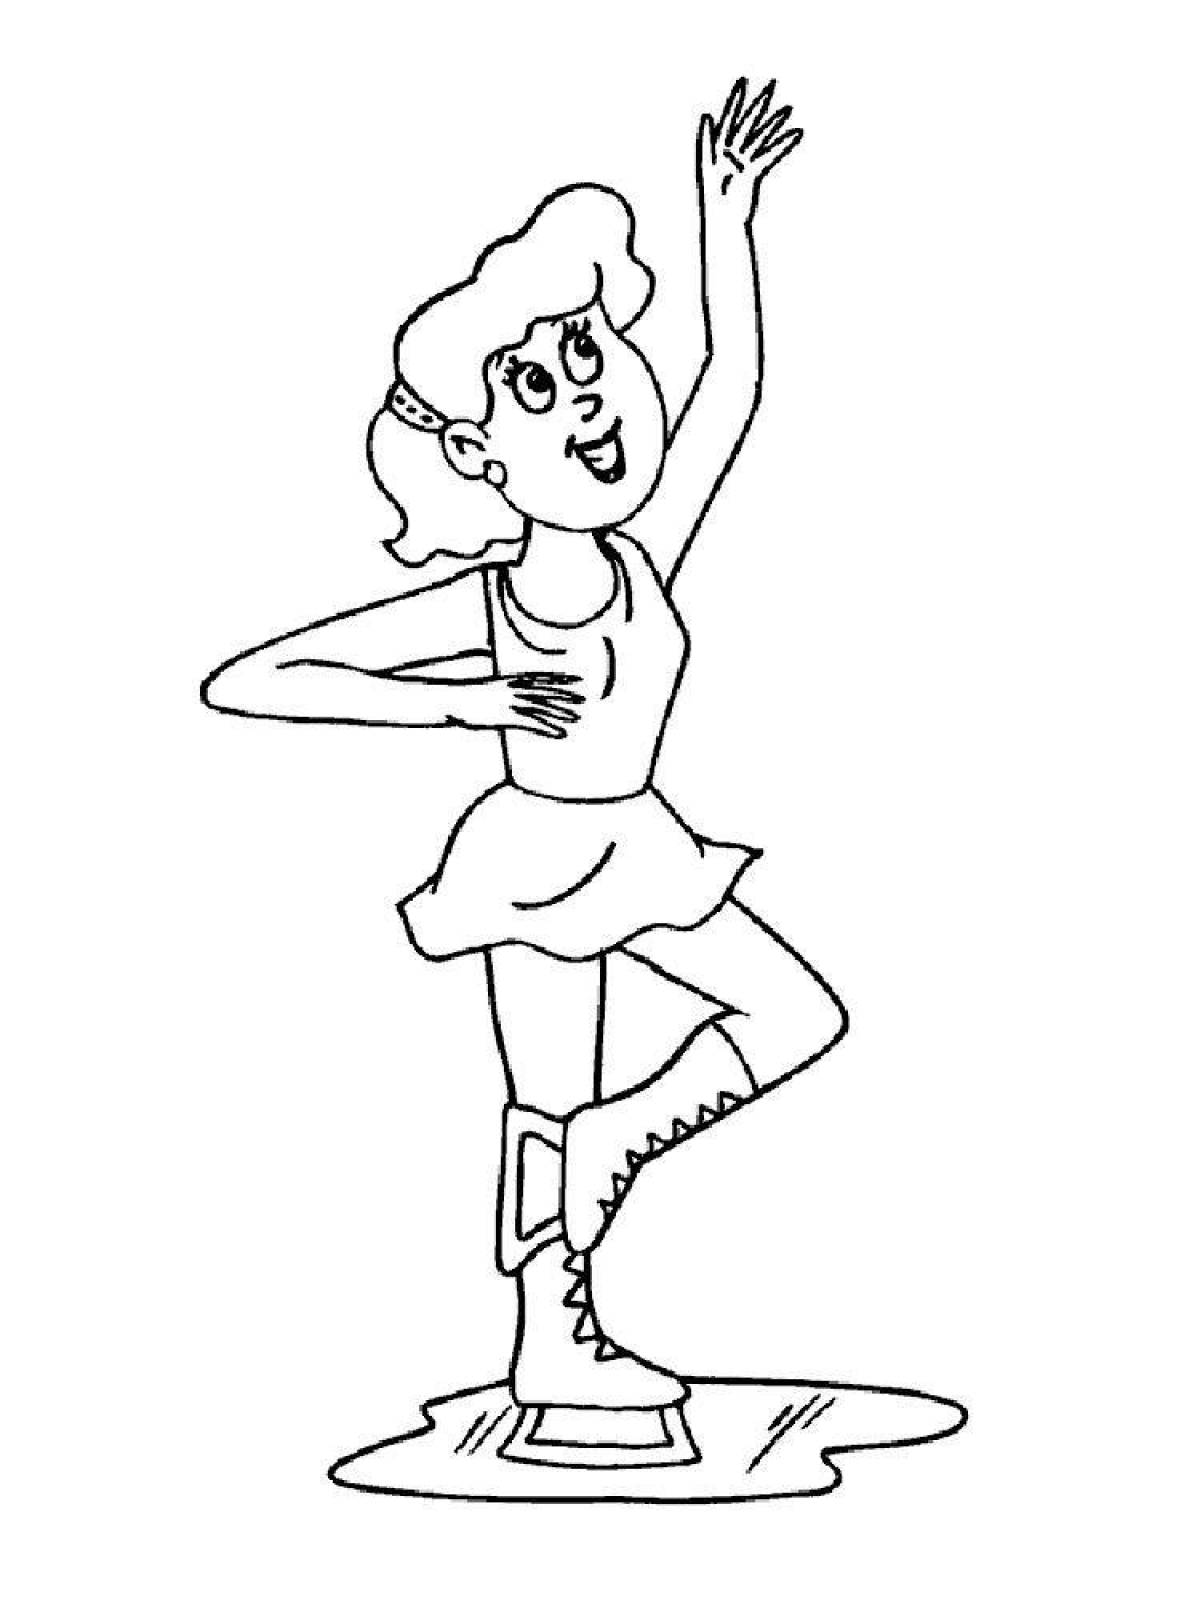 Great figure skating coloring book for kids